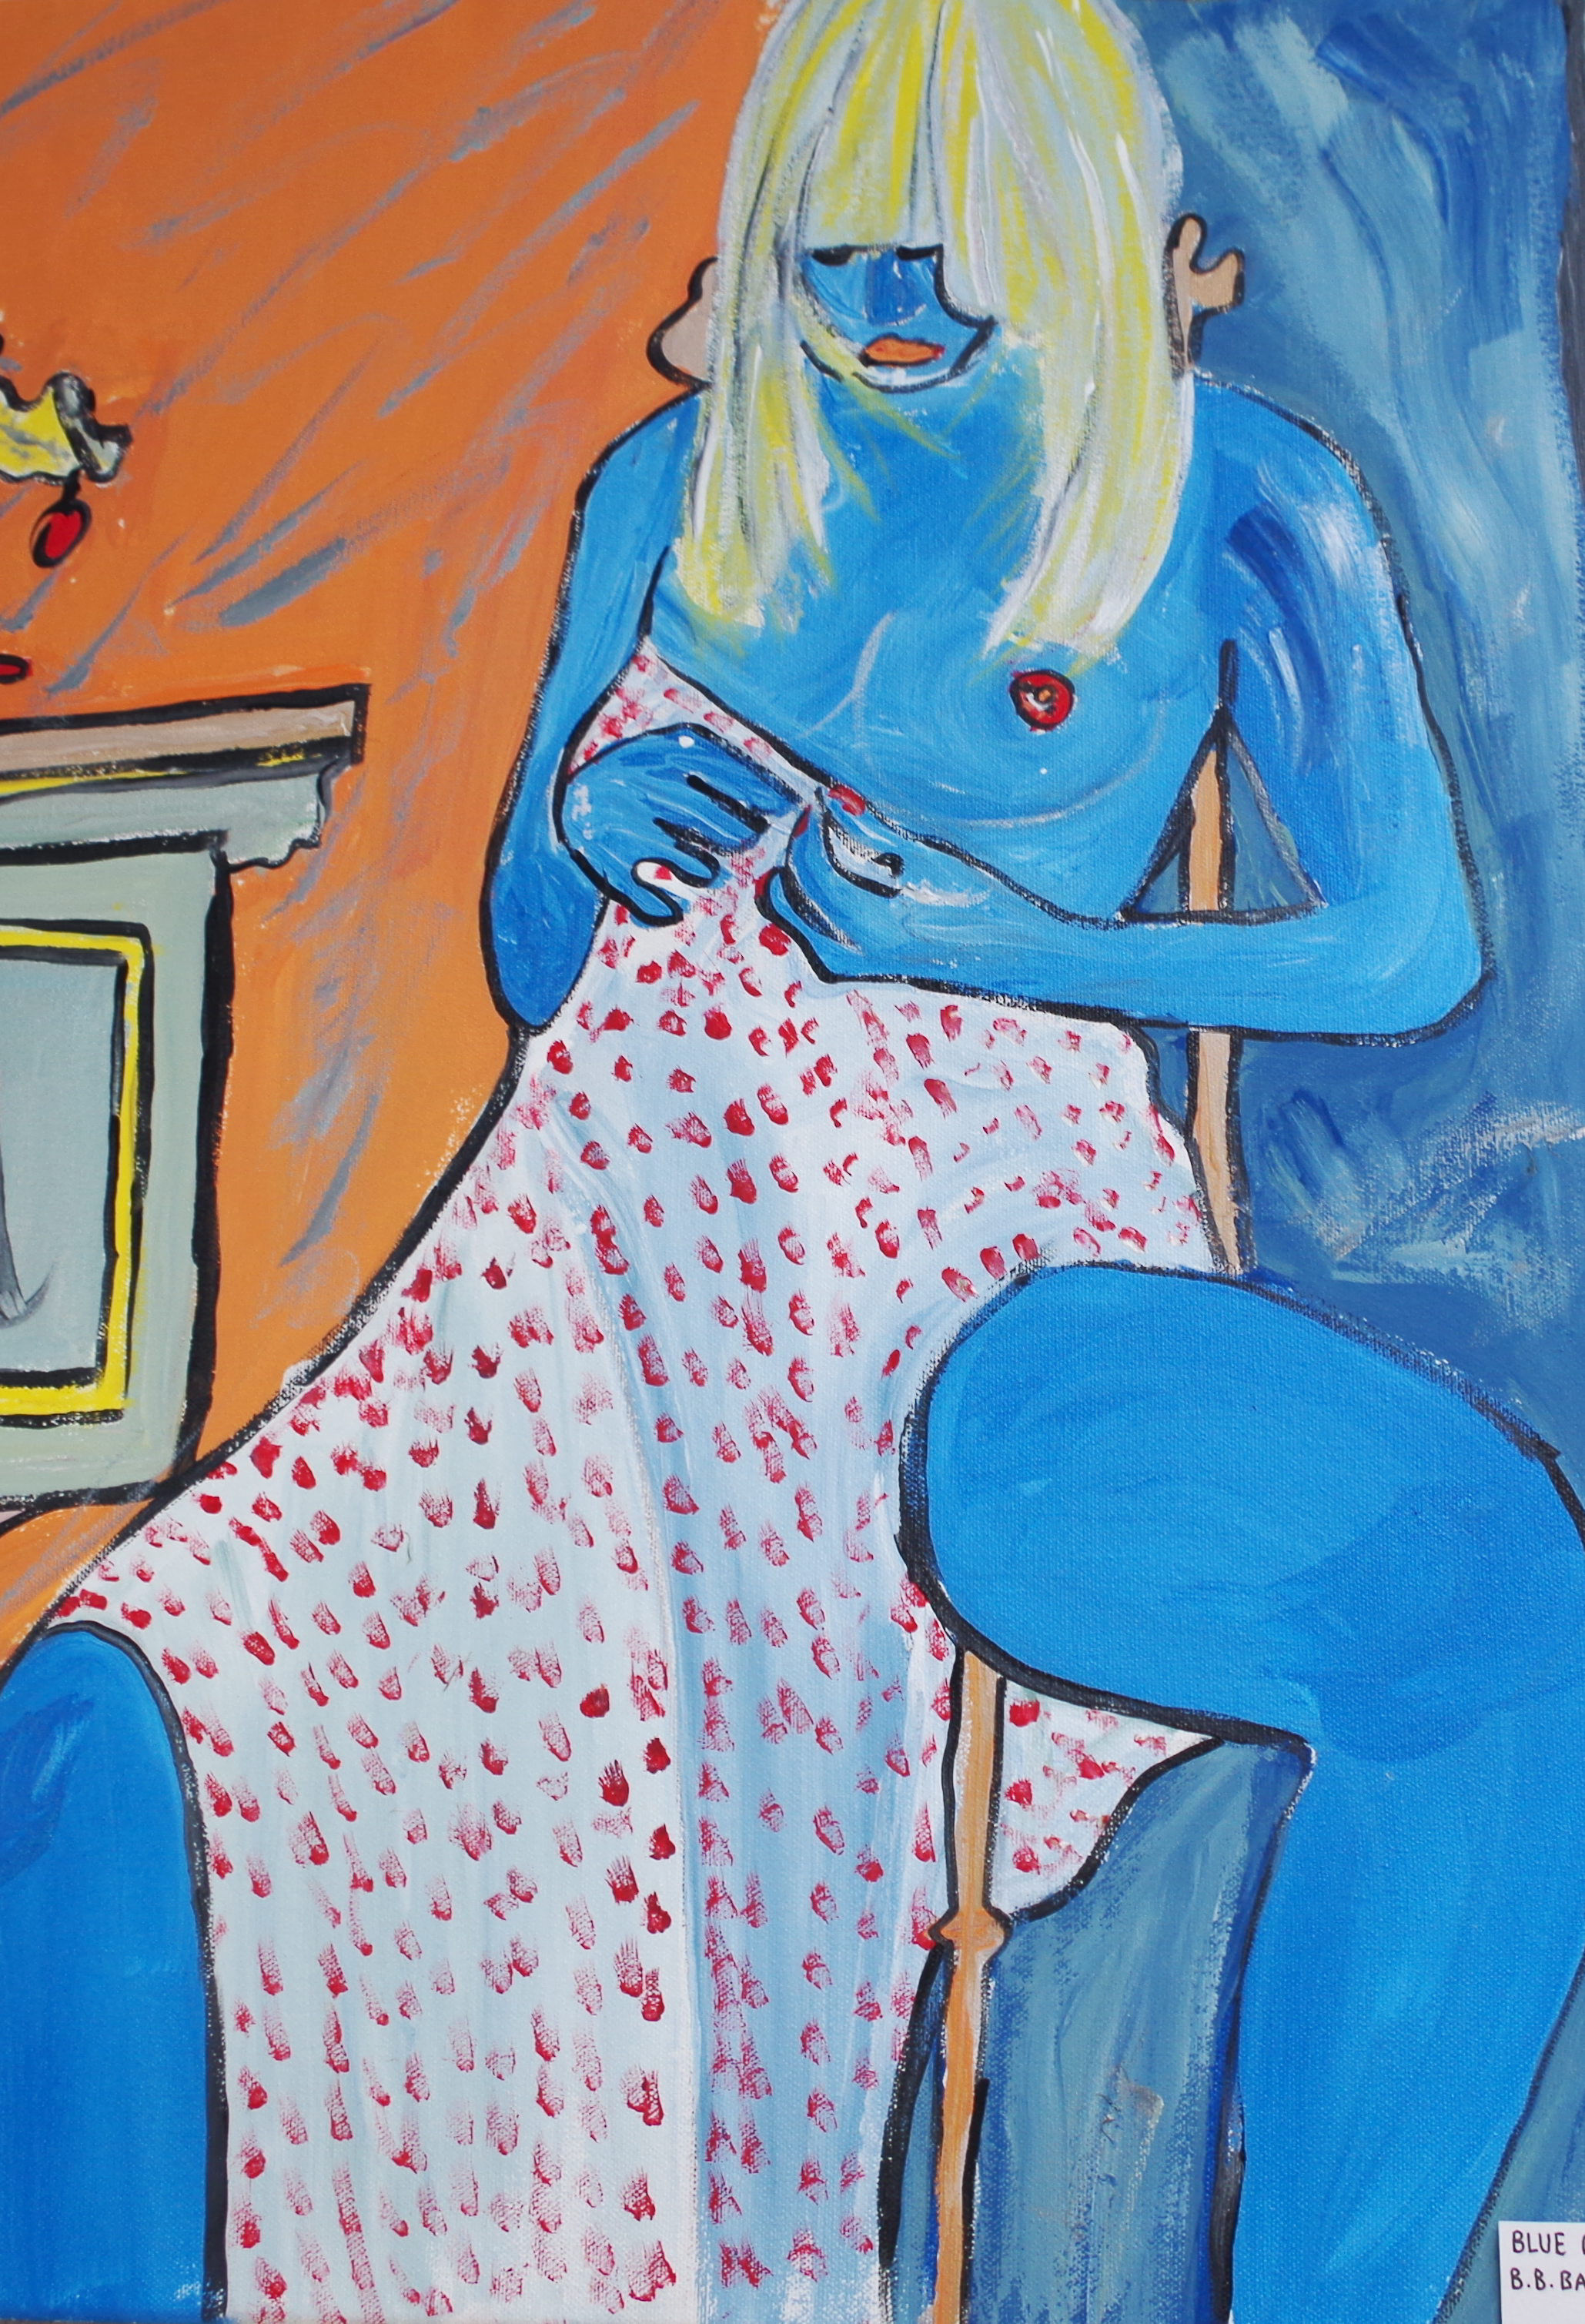 'Blue Blond' by BB Bango based 40 by 30 inch acrylic on canvas. Sold to art collector in UK